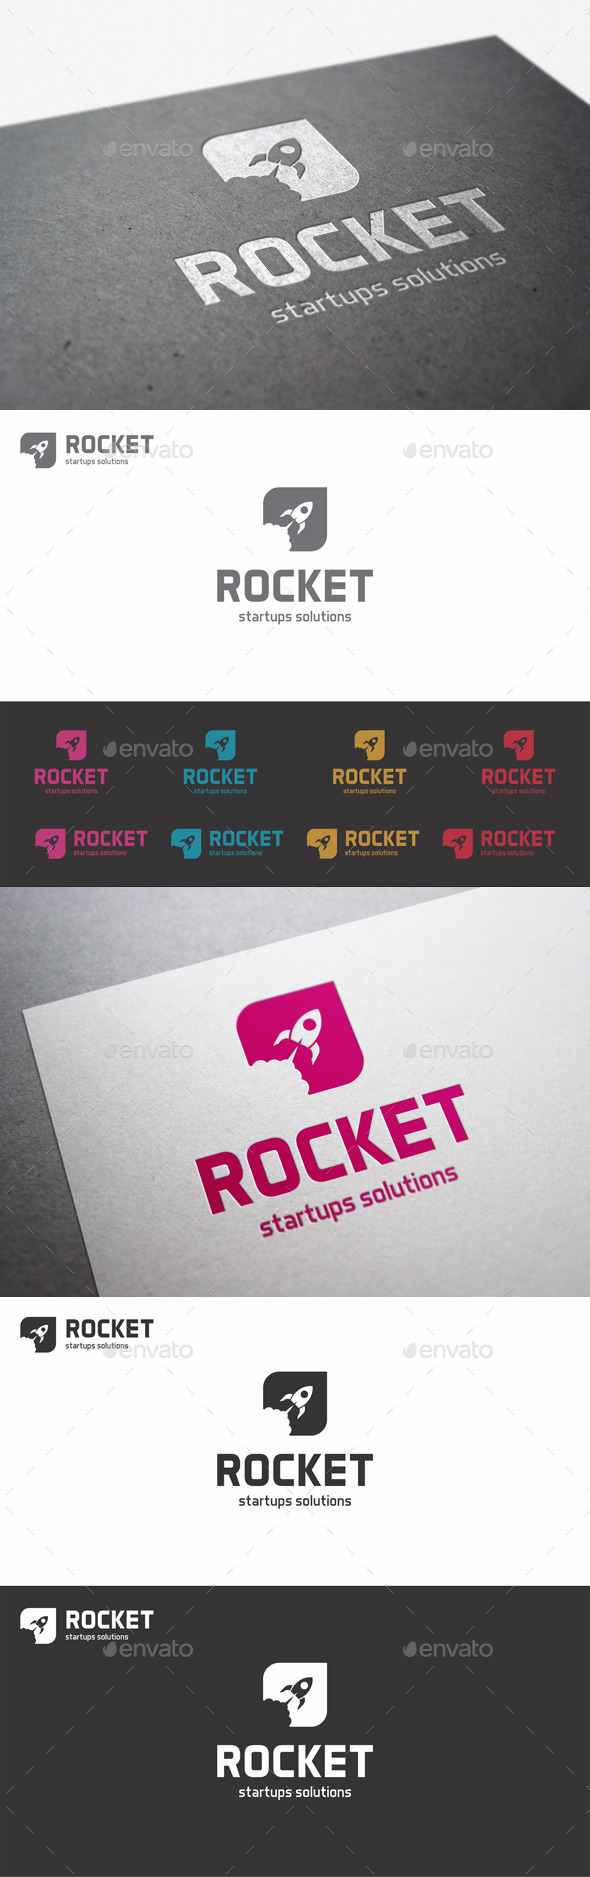 Rocket Launch Logo - Startup Solutions